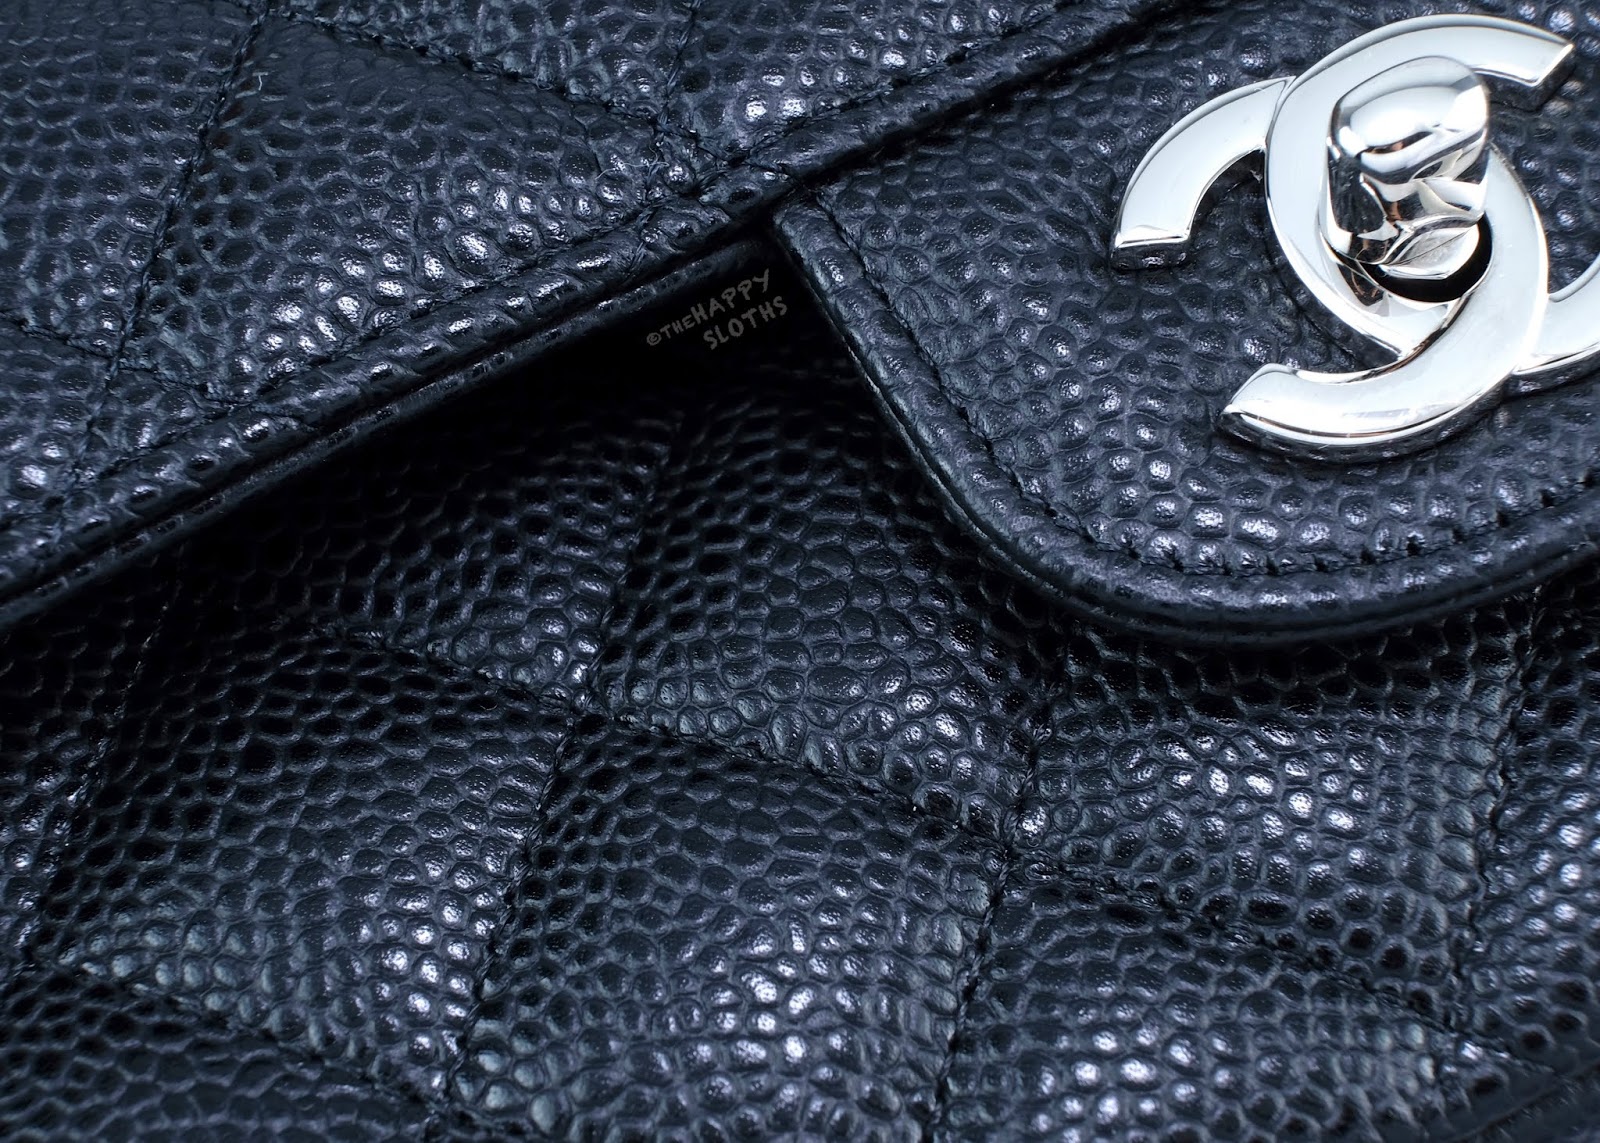 Chanel | Medium Classic Flap Handbag in Black Caviar Leather with Silver Hardware | Grained Calfskin: Review